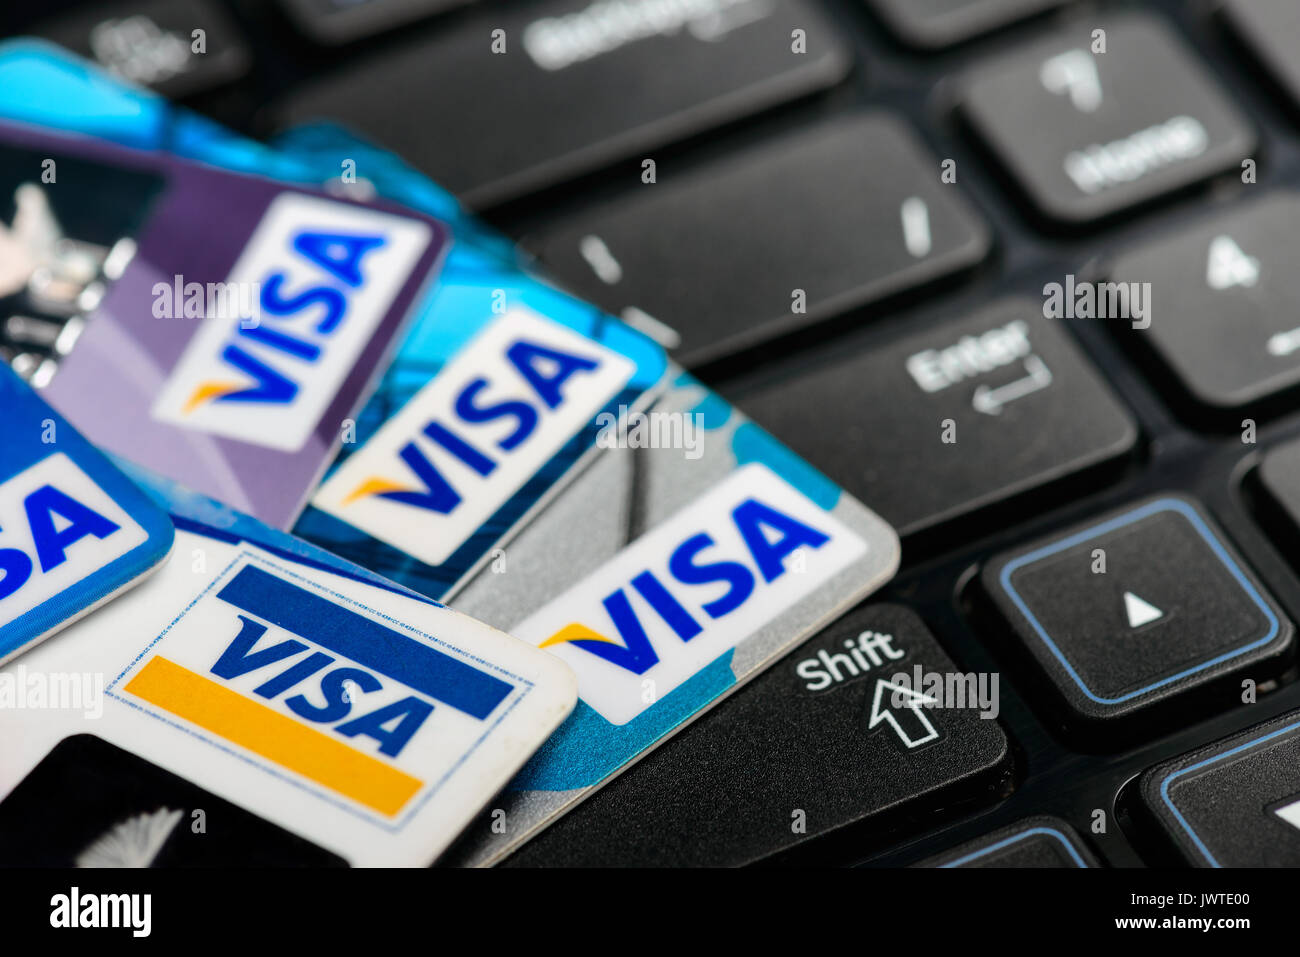 Moscowi, Russia - August 05, 2017: Visa credit cards onr notebook keyboard Stock Photo